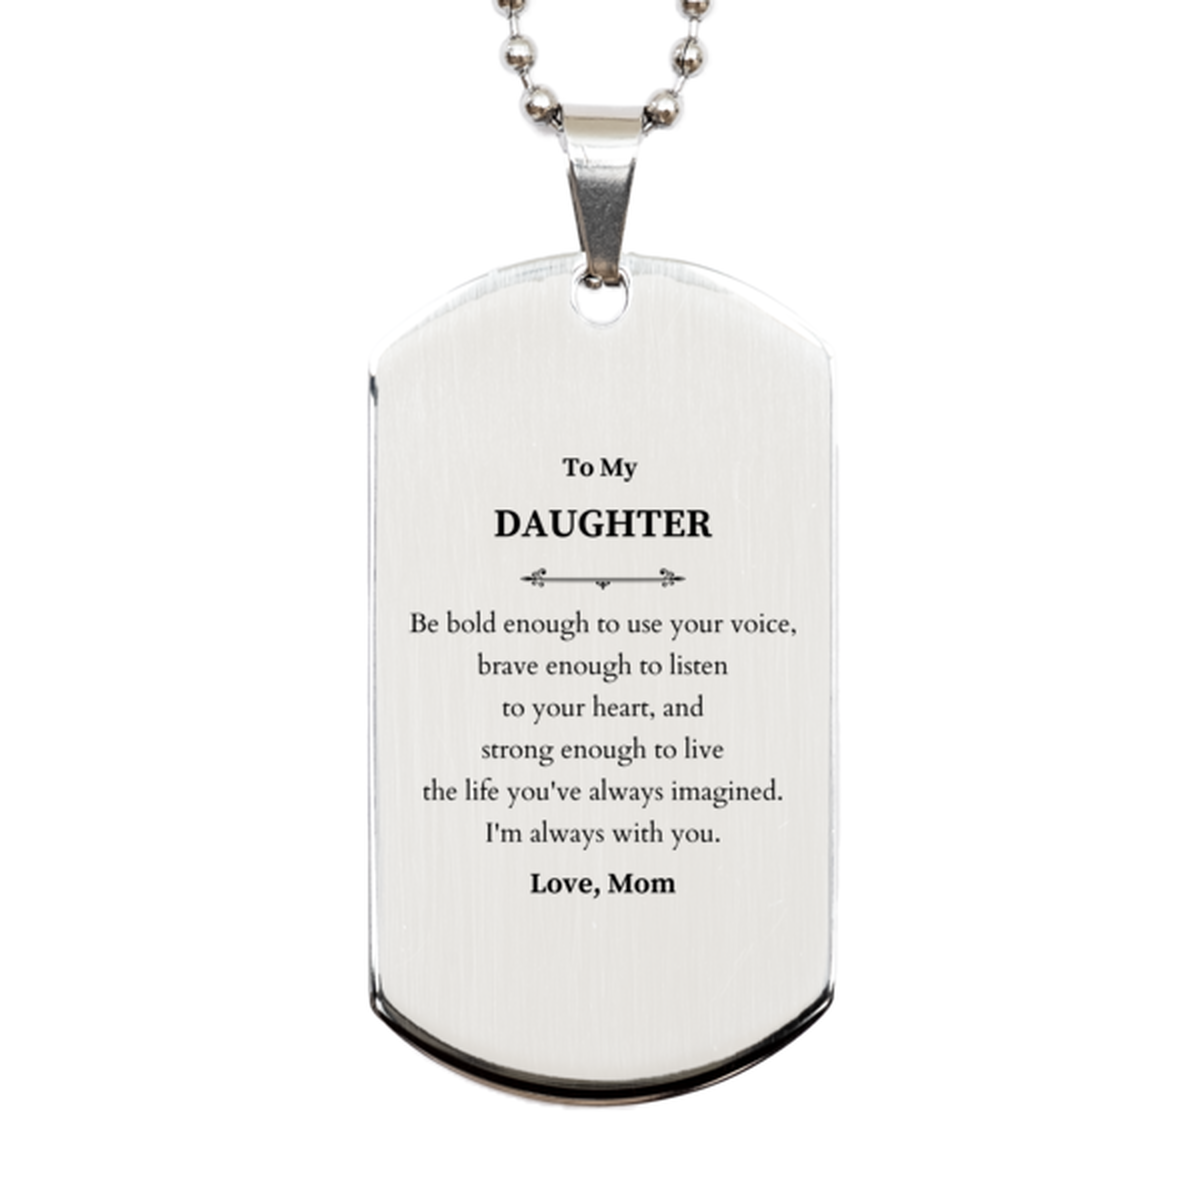 Keepsake Daughter Silver Dog Tag Gift Idea Graduation Christmas Birthday Daughter from Mom, Daughter Be bold enough to use your voice, brave enough to listen to your heart. Love, Mom